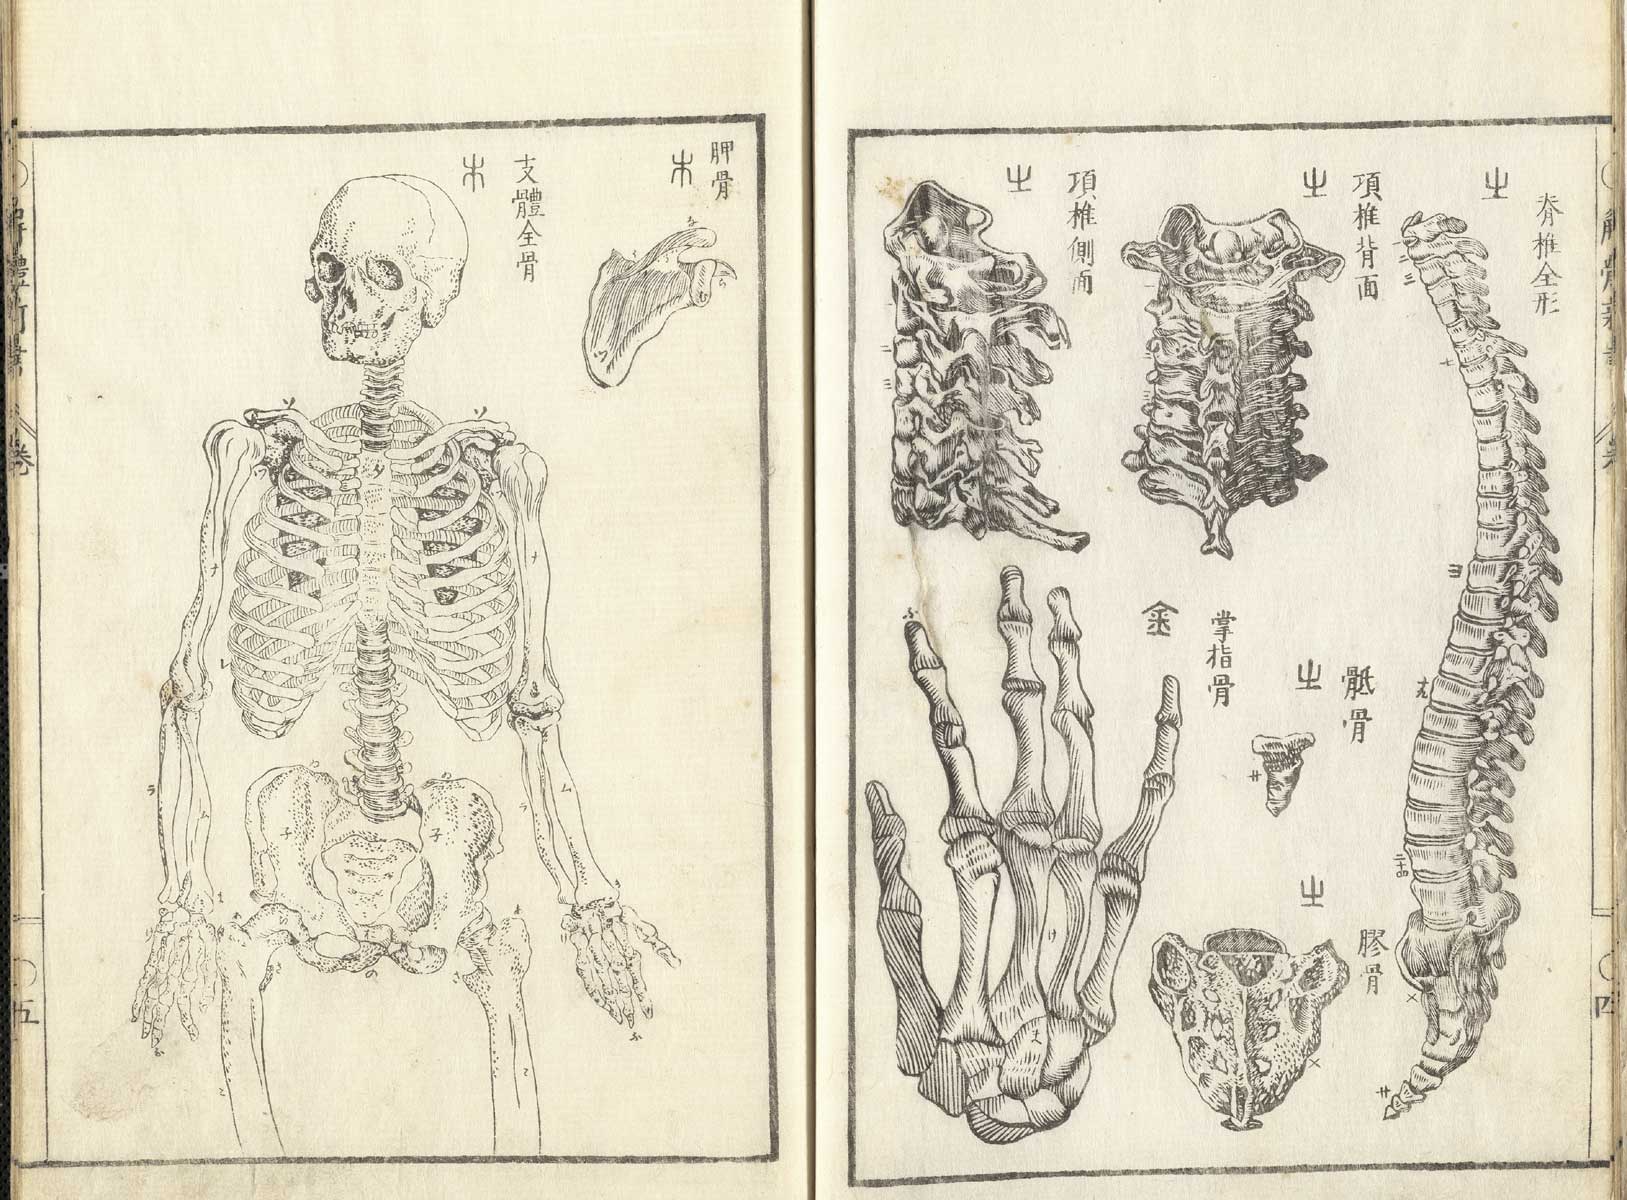 Pages 4 and 5 of Johann Adam Kulmus' Kaitai shinsho. On page 4 are illustrations of the bones of the spine, pelvis and right hand. On page 5 is a three-quarters front view of a skeleton.